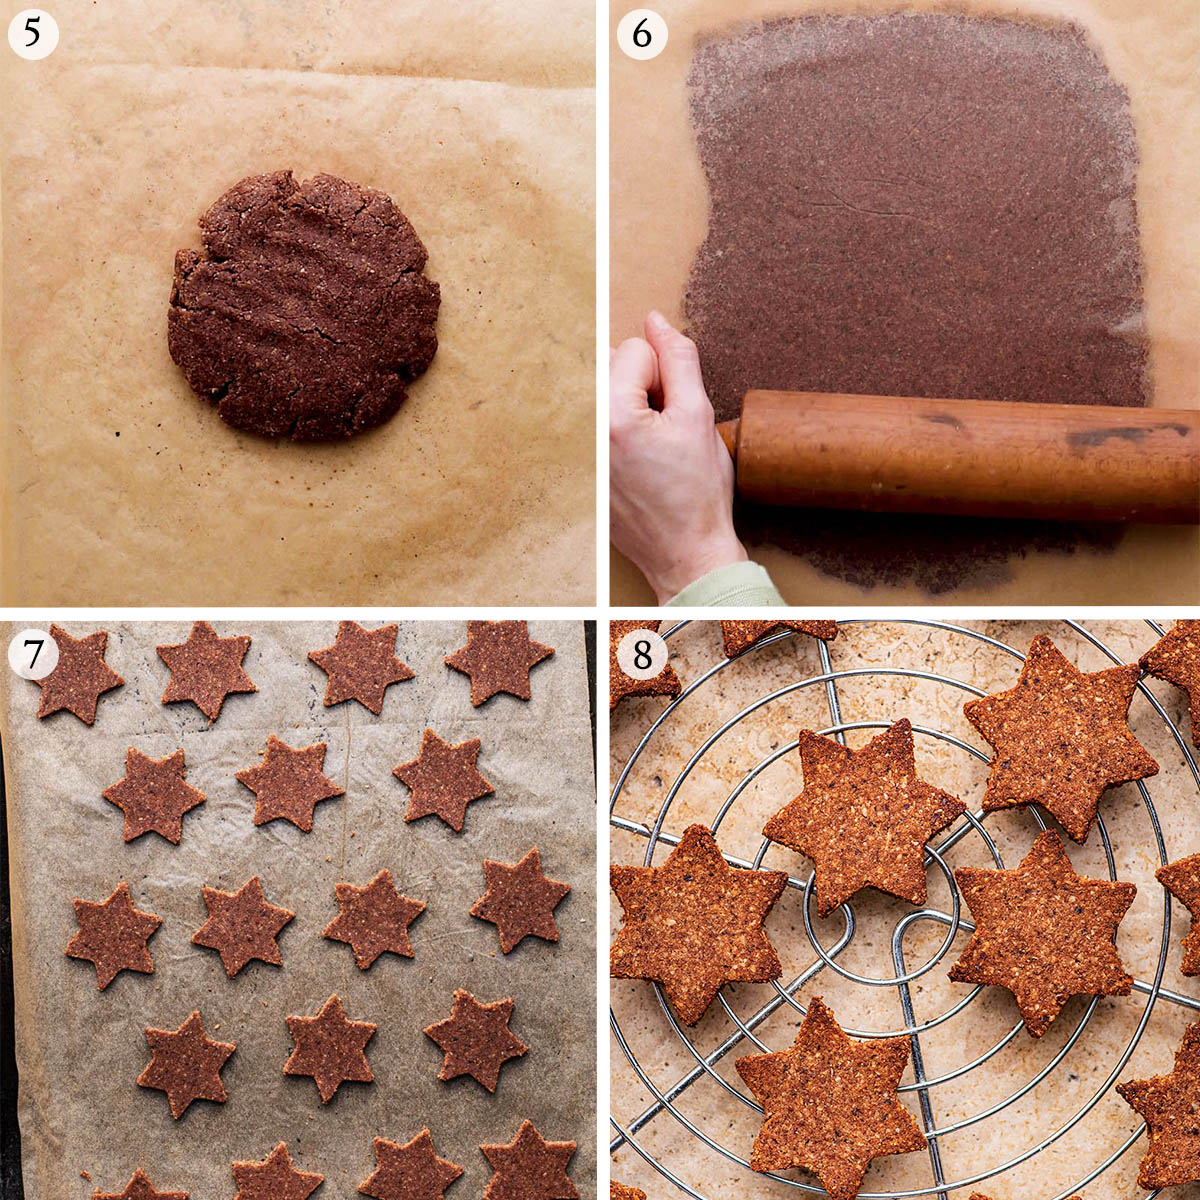 Gluten free gingerbread steps 5 to 8.